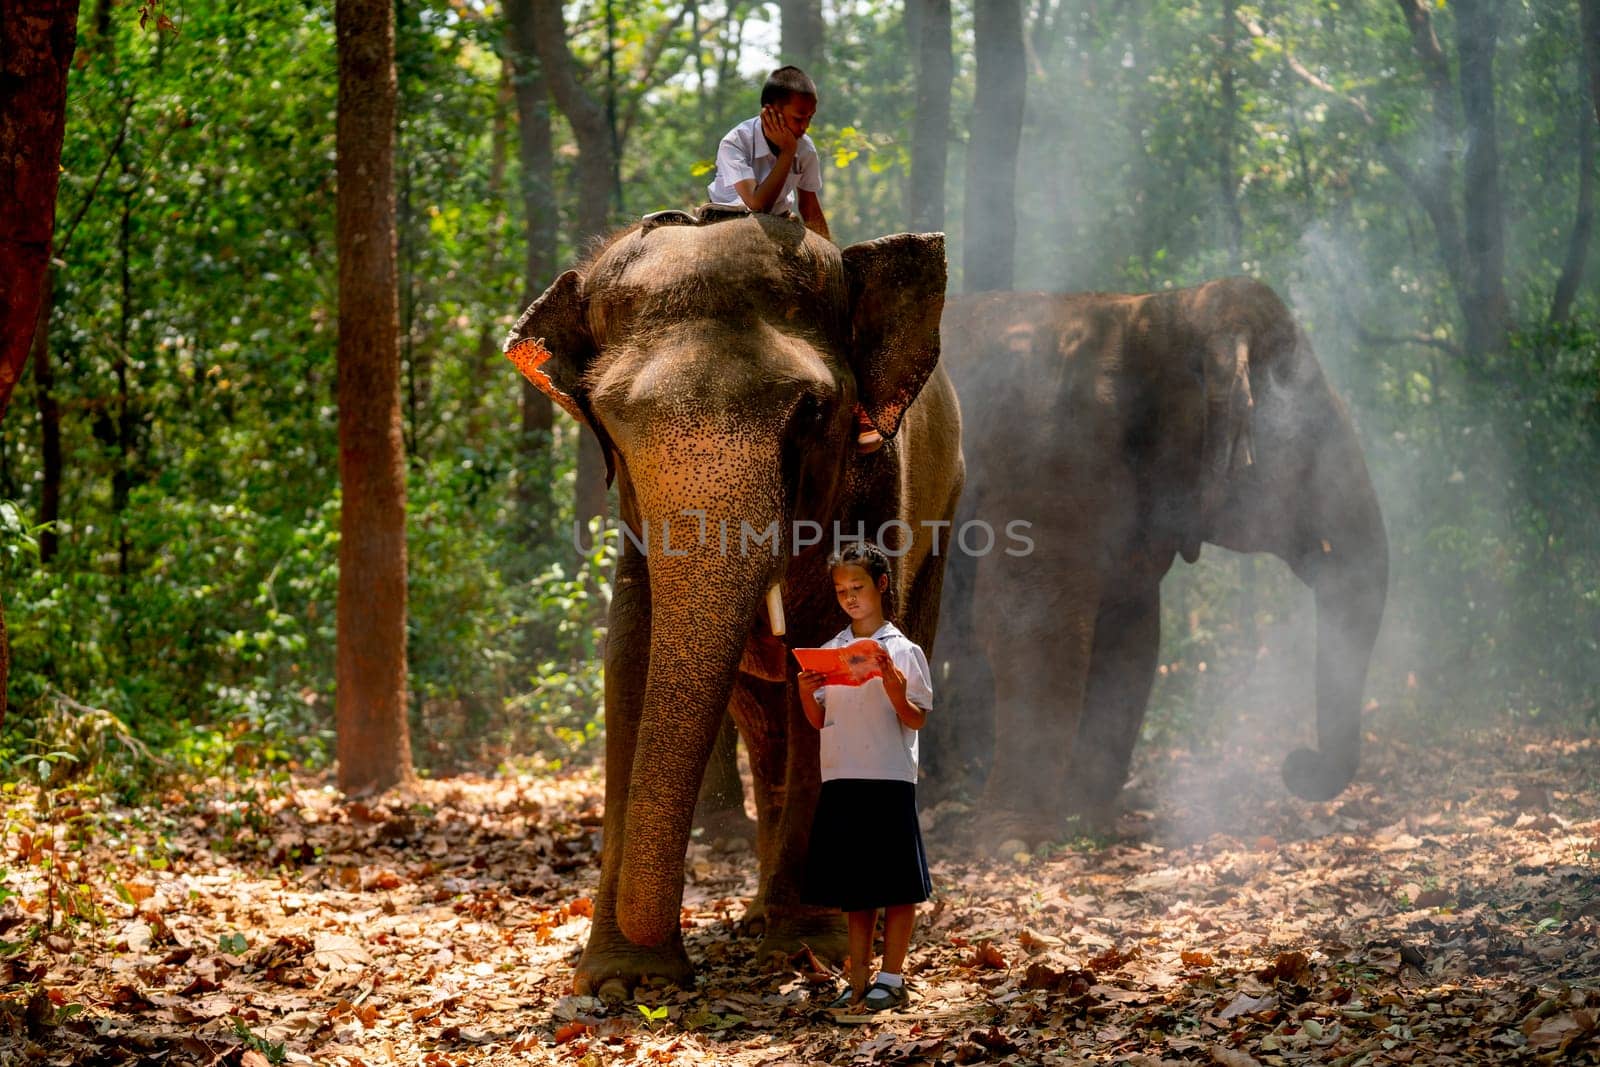 Asian girl with student uniform read book and stand near elephant with one boy stay on its head or back and they stay in forest in concept of relationship between human and wildlife. by nrradmin